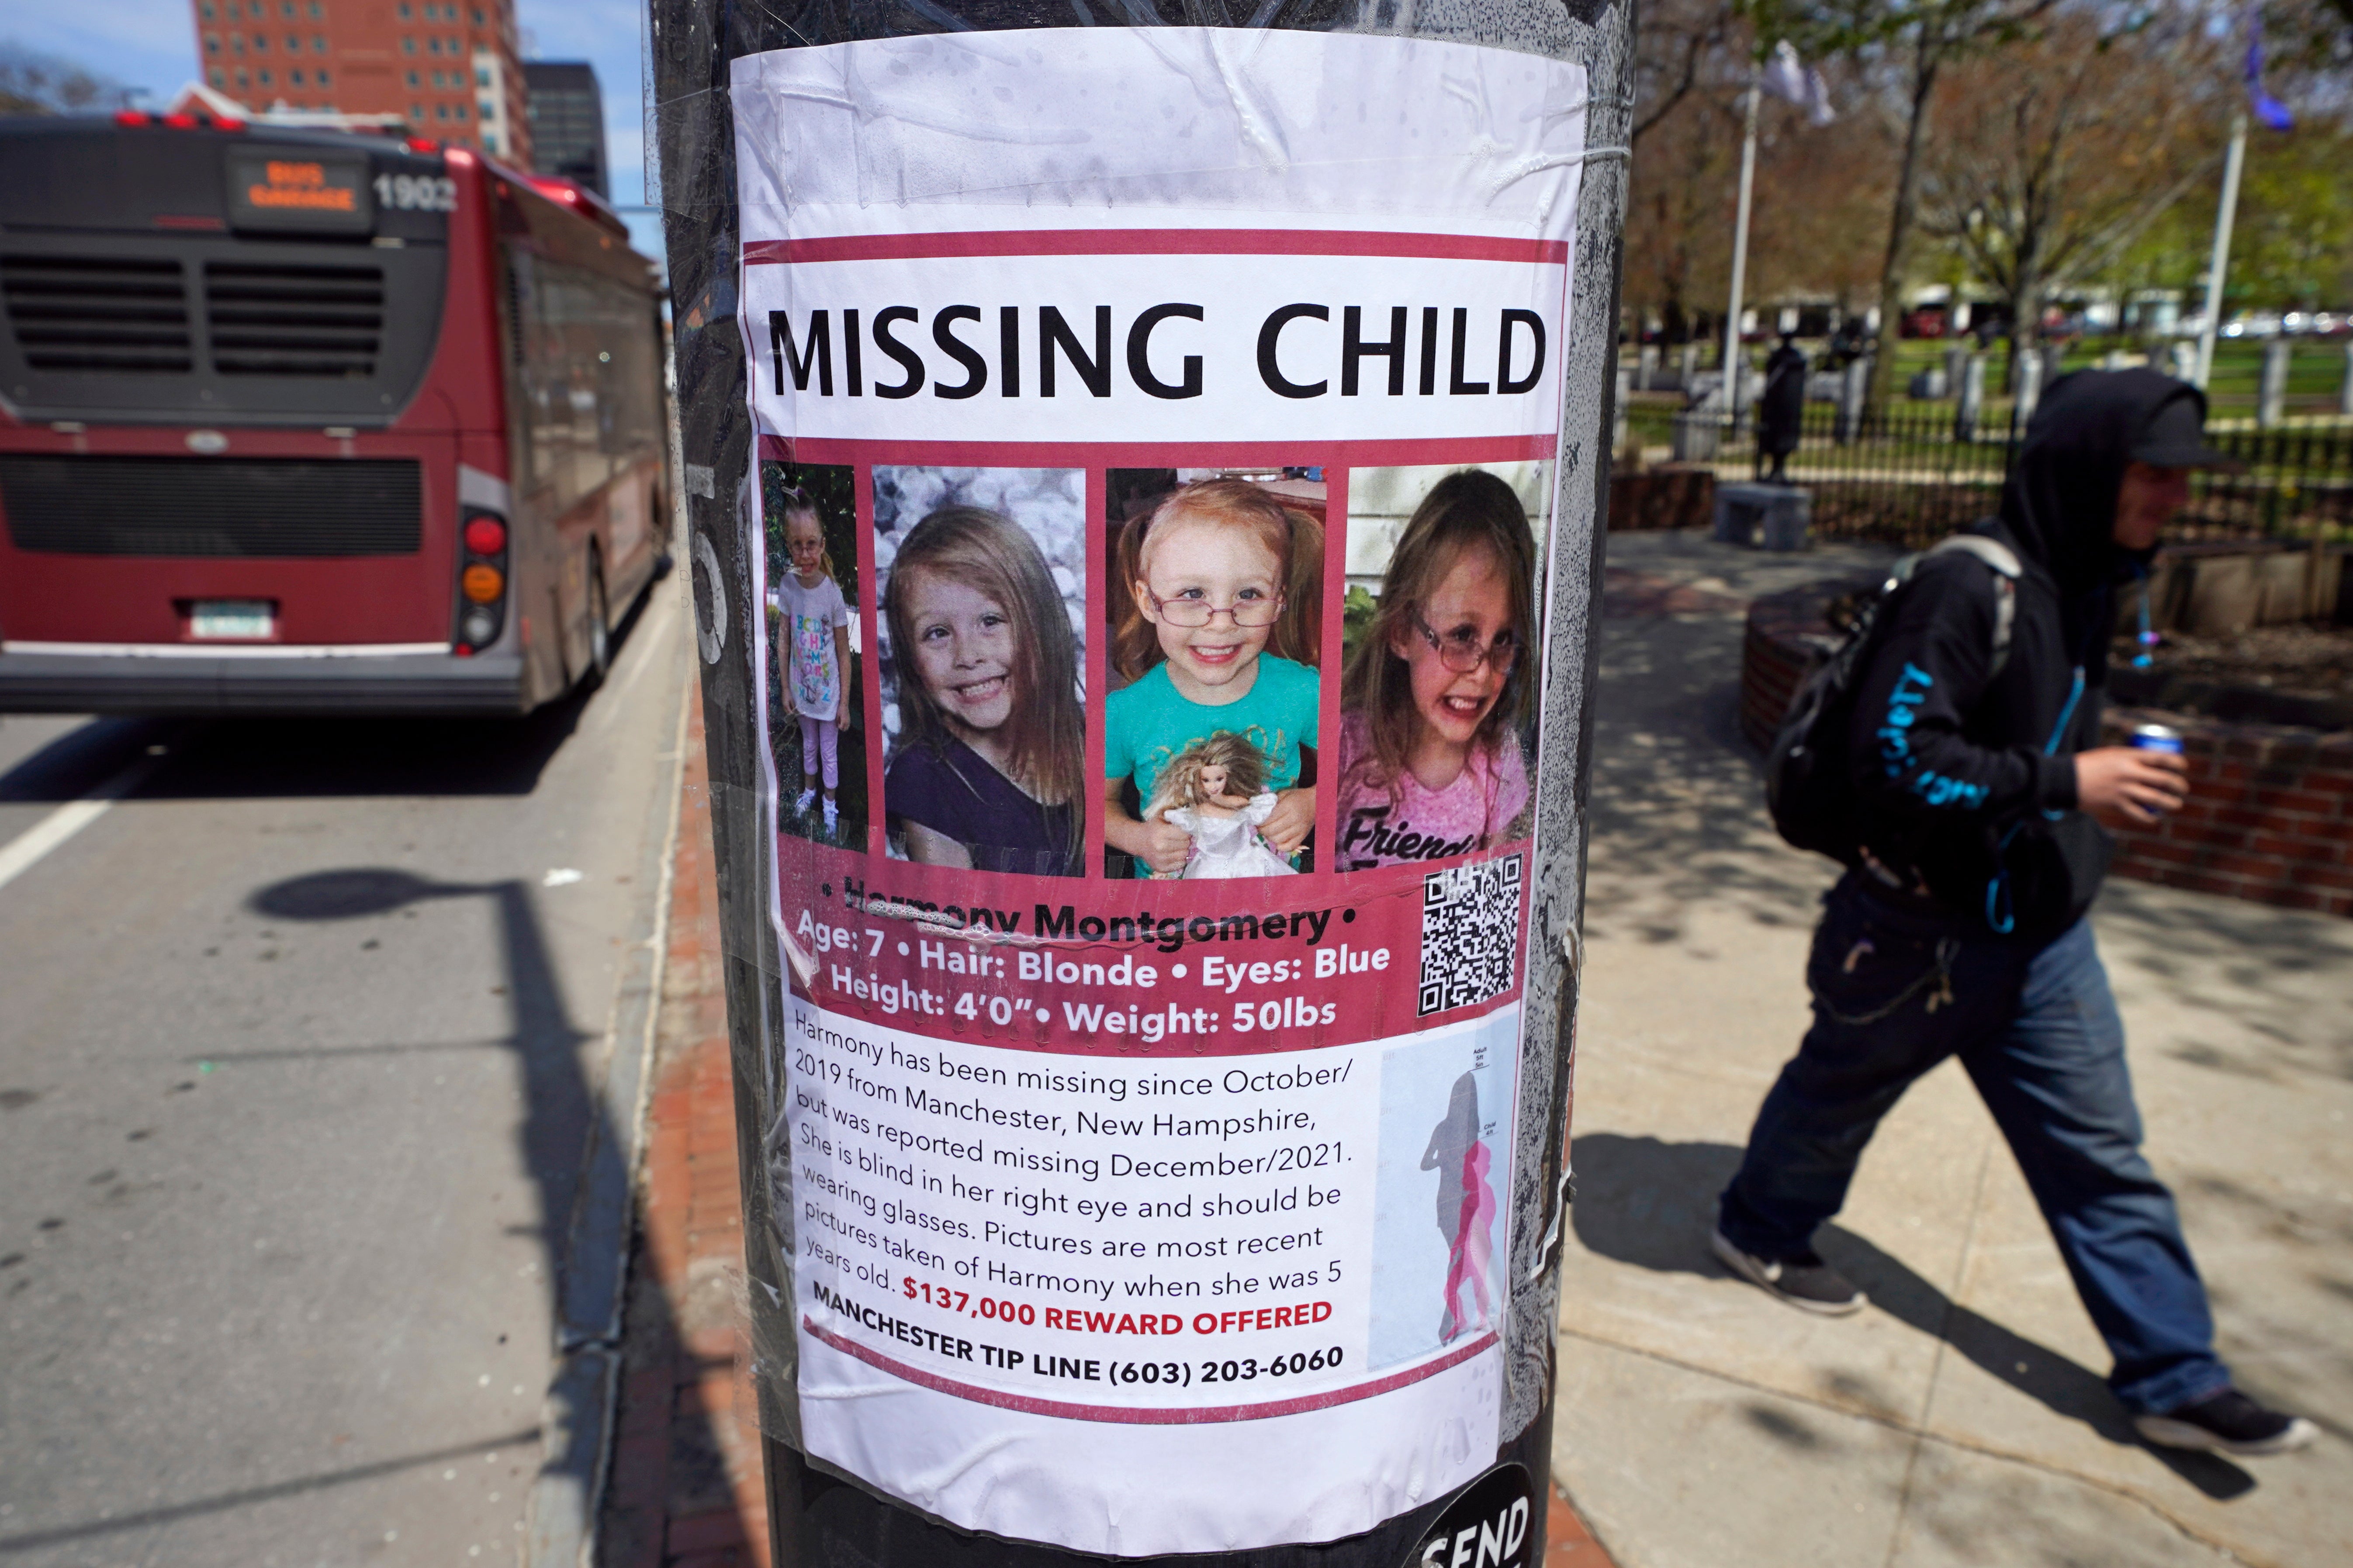 A man walks past a missing child poster for Harmony Montgomery